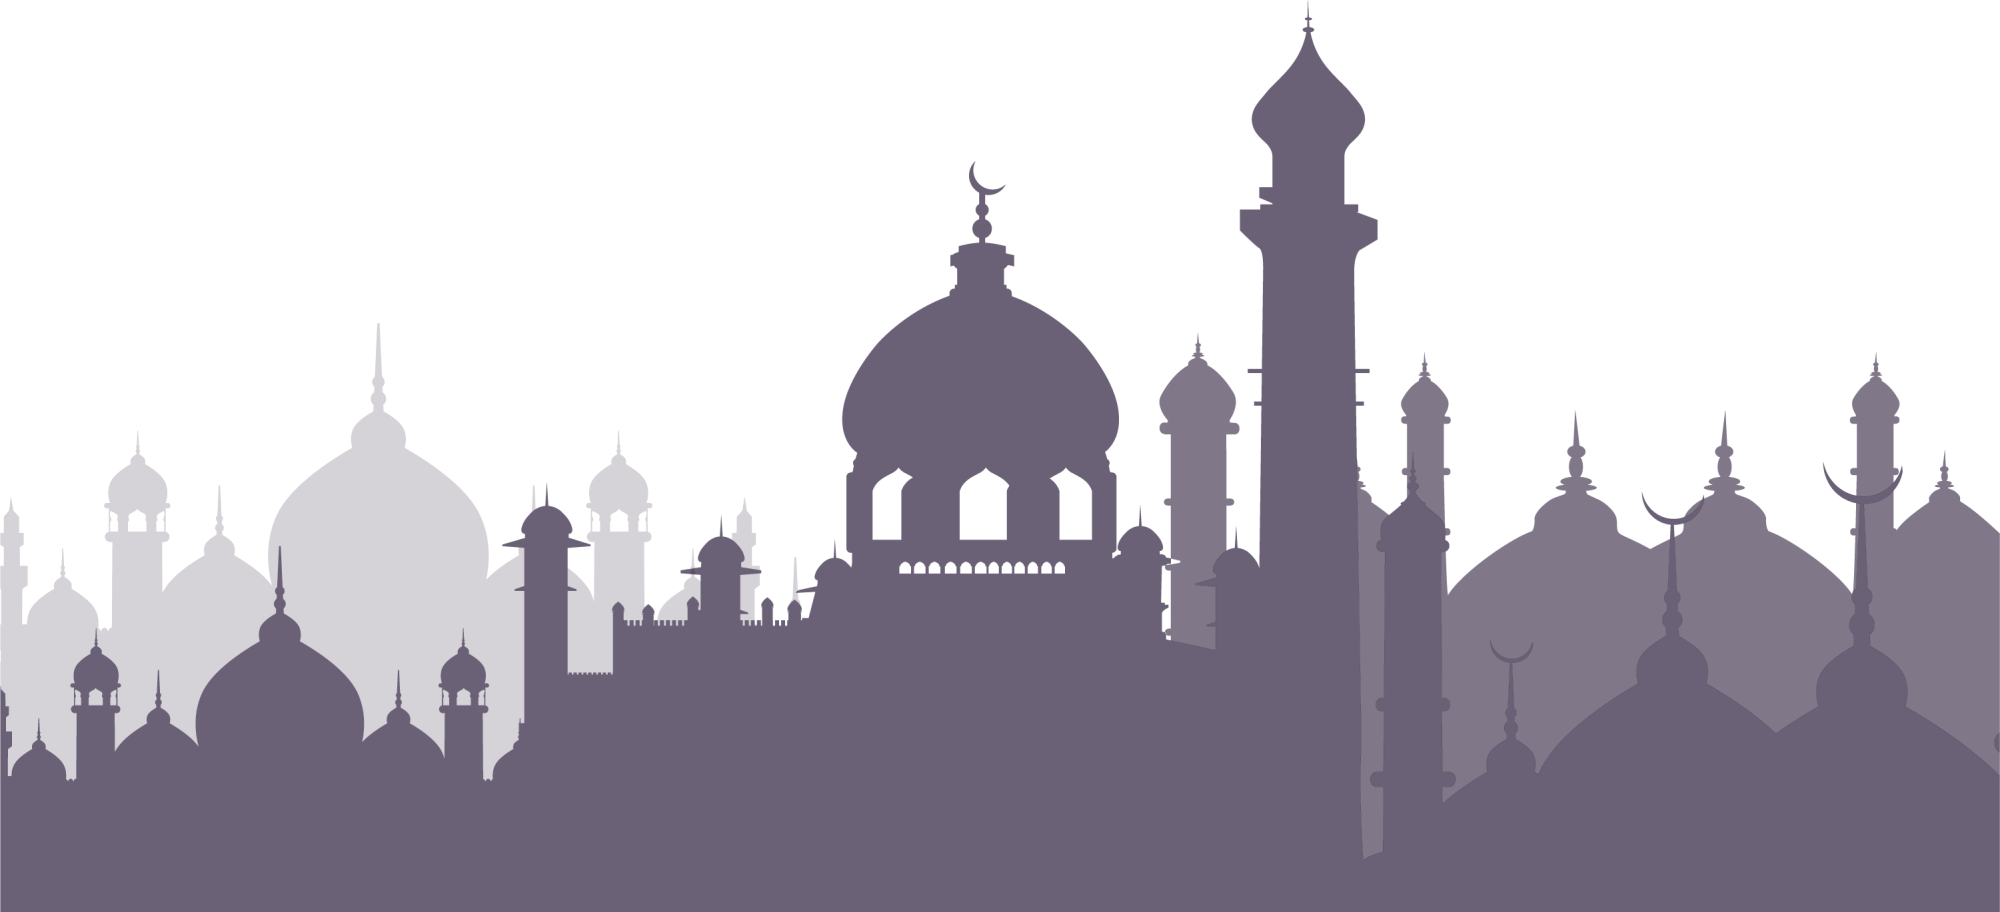 Islamic Png Images Islam Images Masjid Mosque Free Download Free Transparent Png Logos